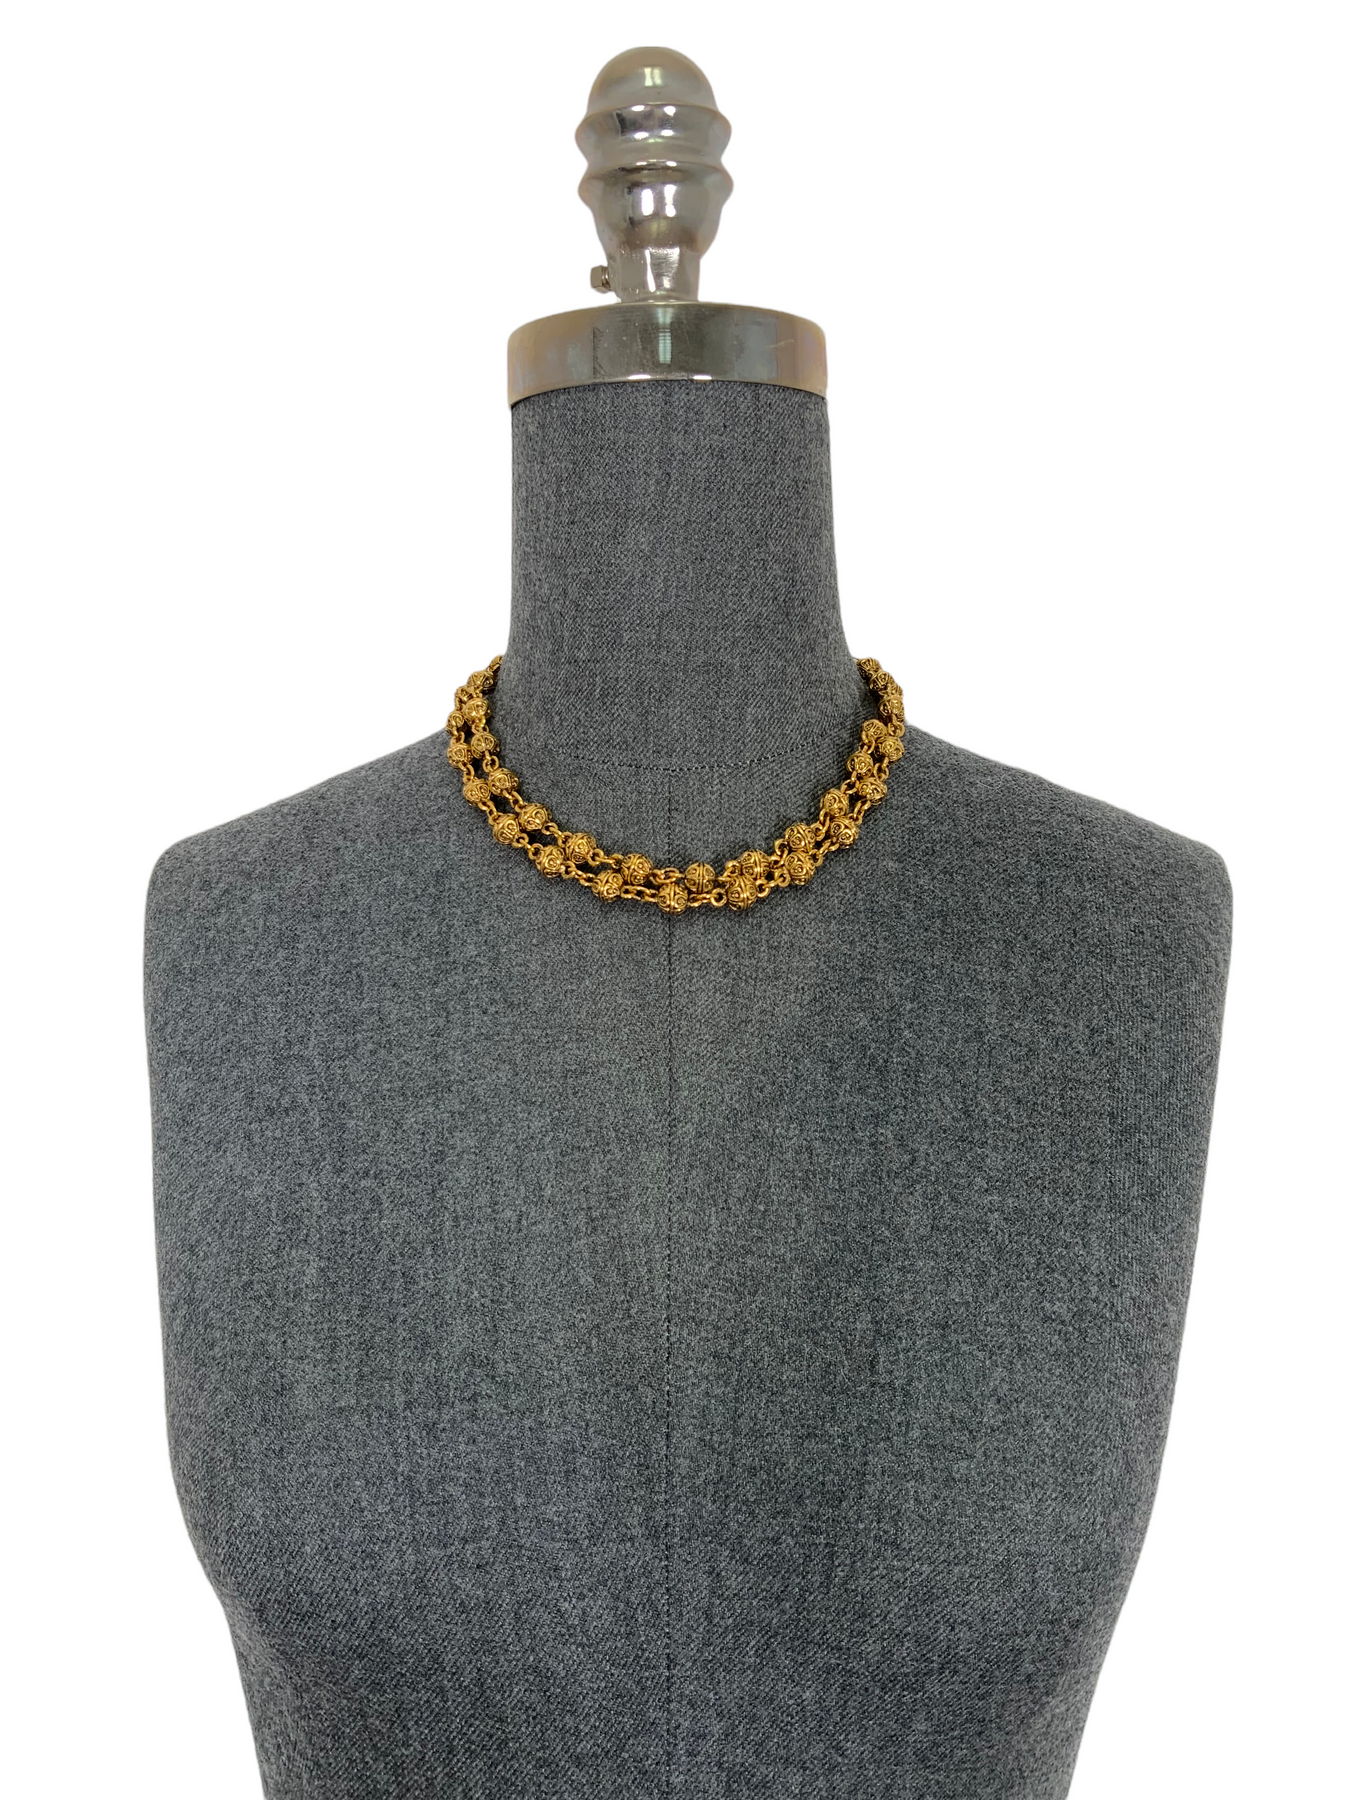 Classic Chanel on Chunky Chain Button Necklace — Blue Blood Metal | Vintage  Rings & Necklaces